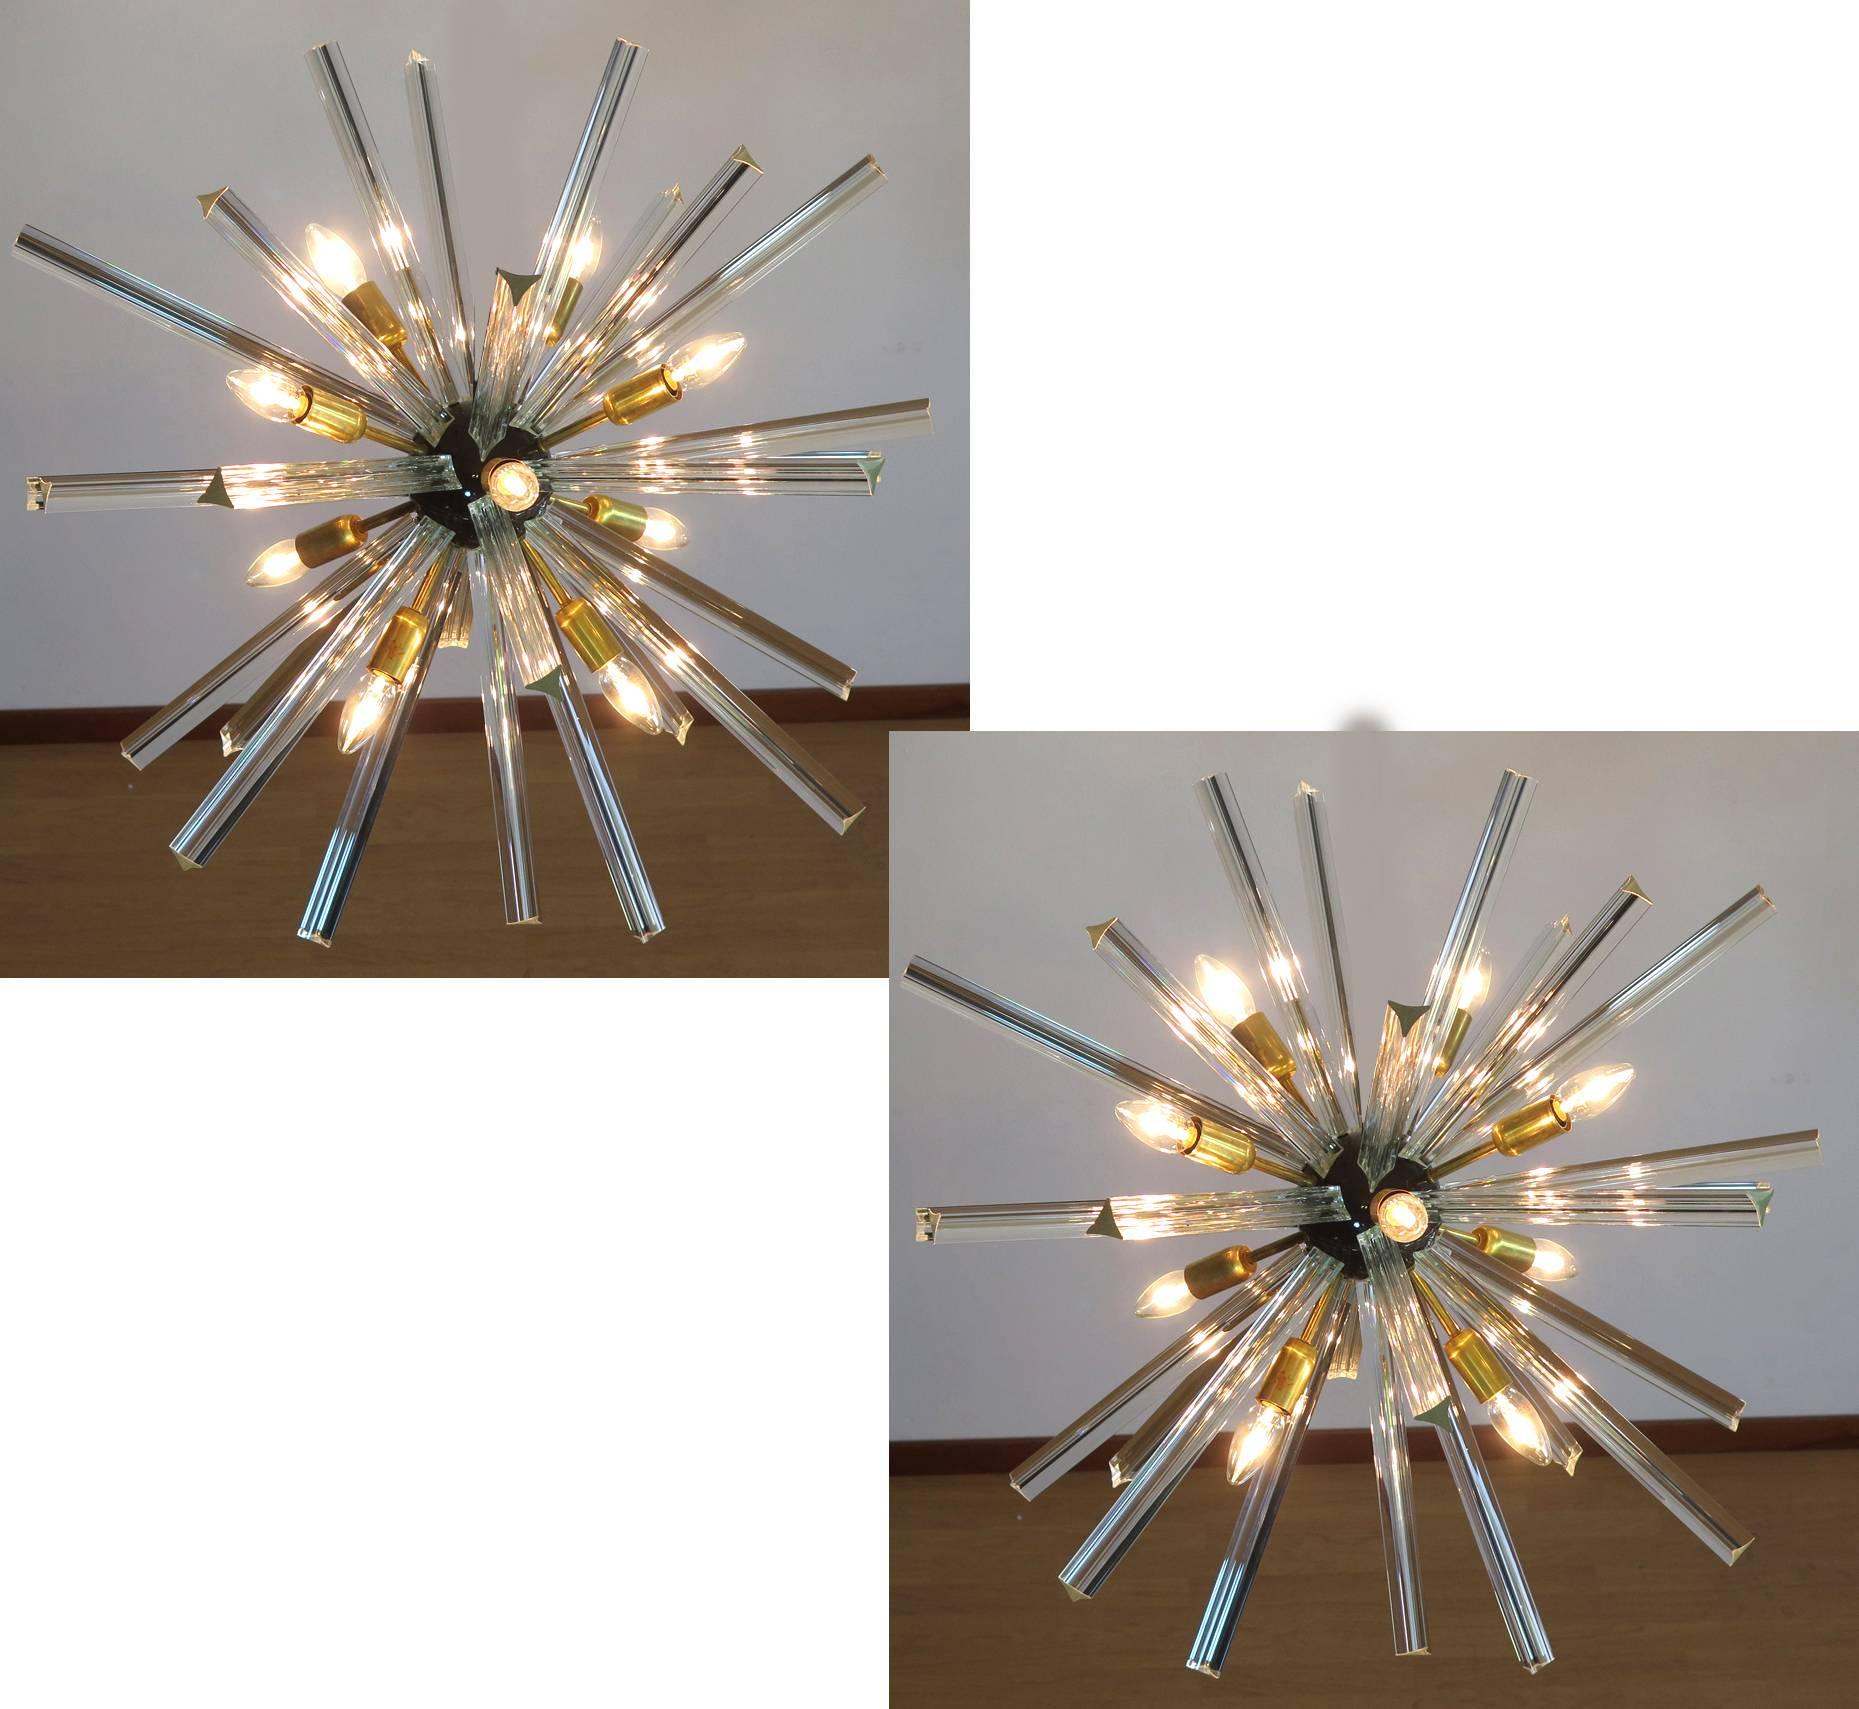 Sputnik chandelier surrounding 30 crystal glass 'triedri' prisms radiating from a centre black metal nucleus. Brass lamp holder.
Dimensions: 47.25 inches (120 cm) height with chain; 29.50 inches (75 cm) diameter.
Dimension glasses: 15 prisms